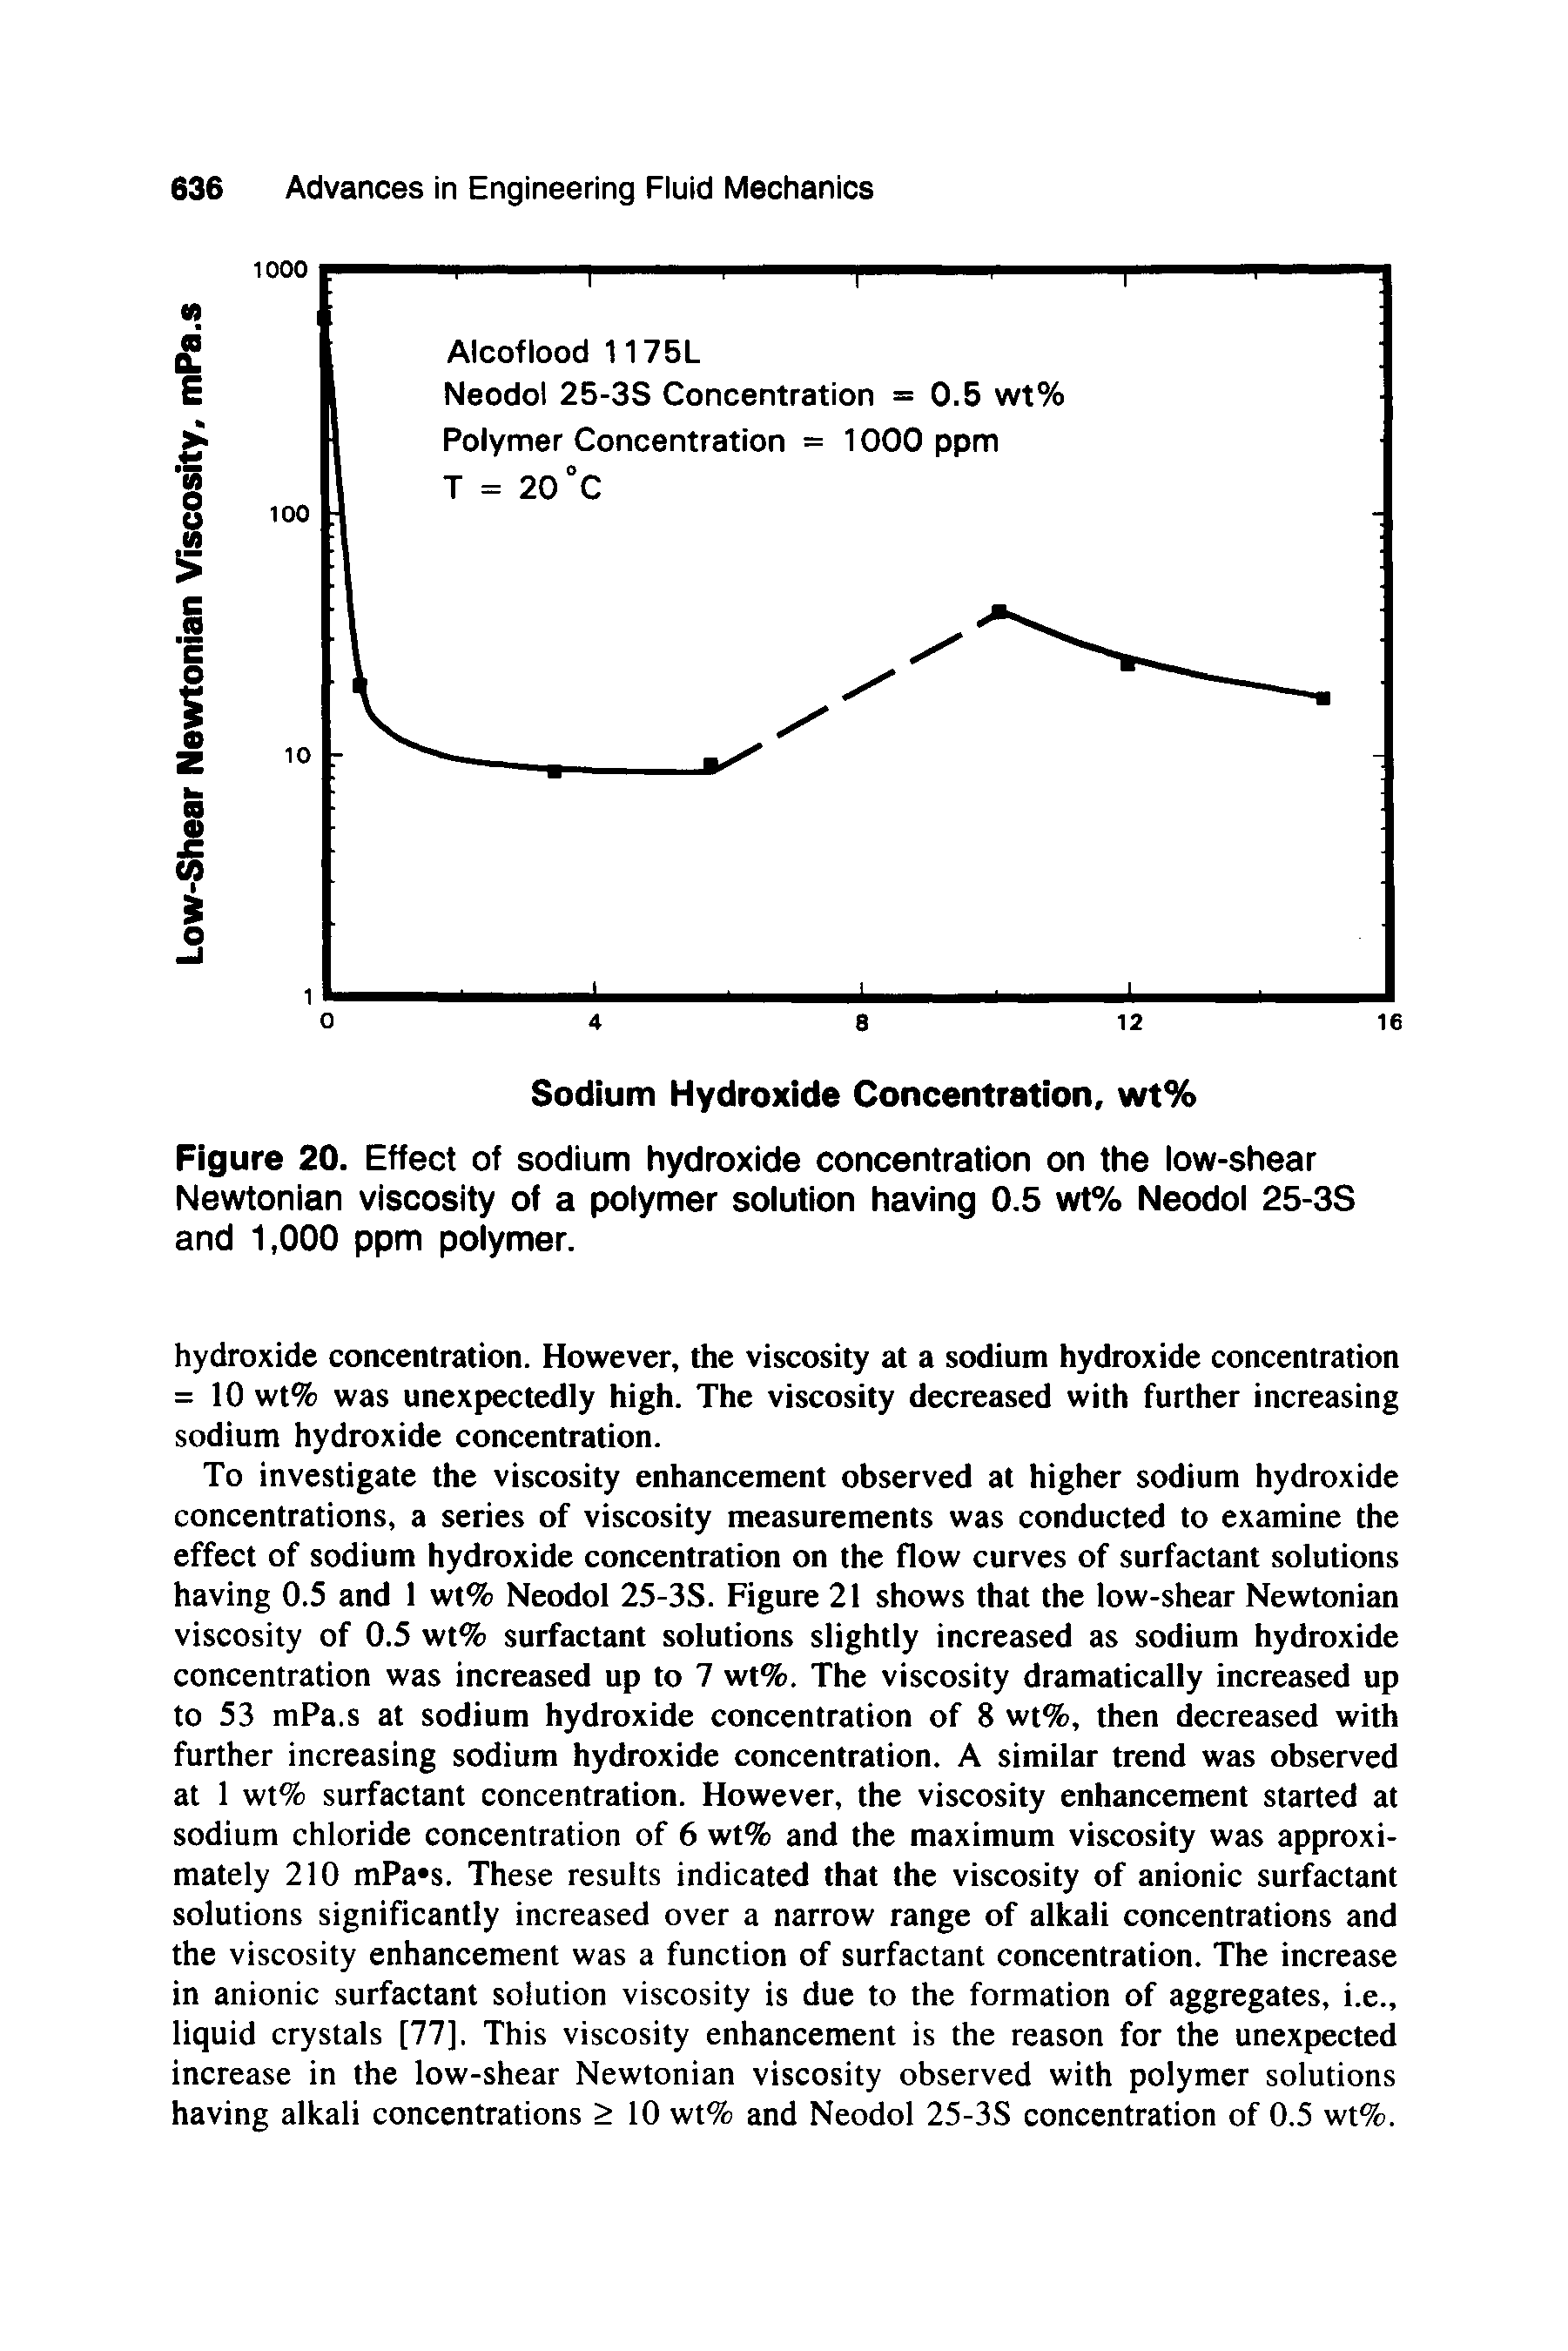 Figure 20. Effect of sodium hydroxide concentration on the lovr-shear Newtonian viscosity of a polymer solution having 0.5 wt% Neodol 25-3S and 1,000 ppm polymer.